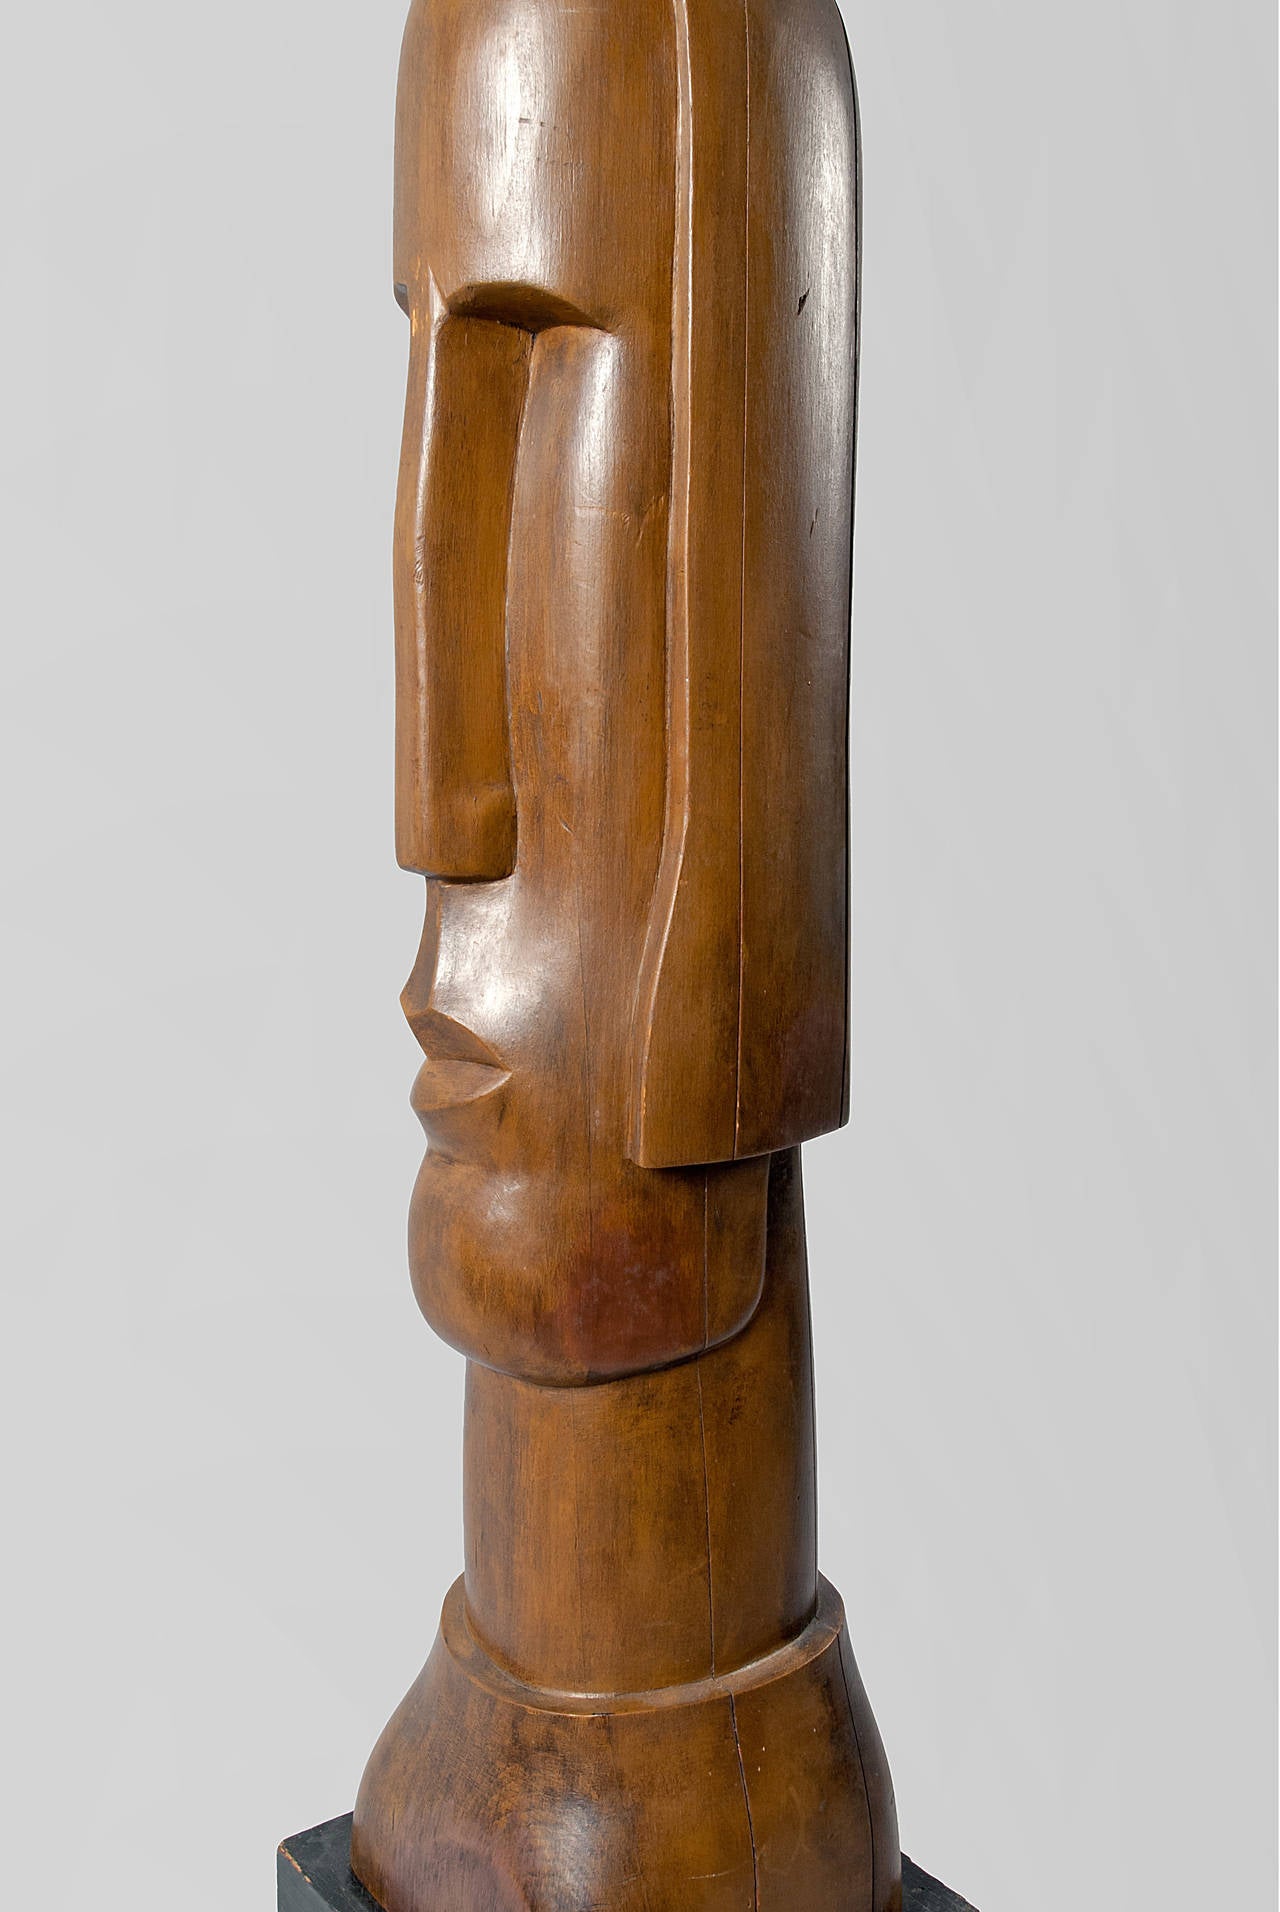 Wood sculpture of a “Female head with angular nose” by Nikita Karpenko (1898-1961).
The shoulder length bust depicts a female head with long beveled nose showing a quizzical expression. Pine finished with brown shoe polish.
31” high without